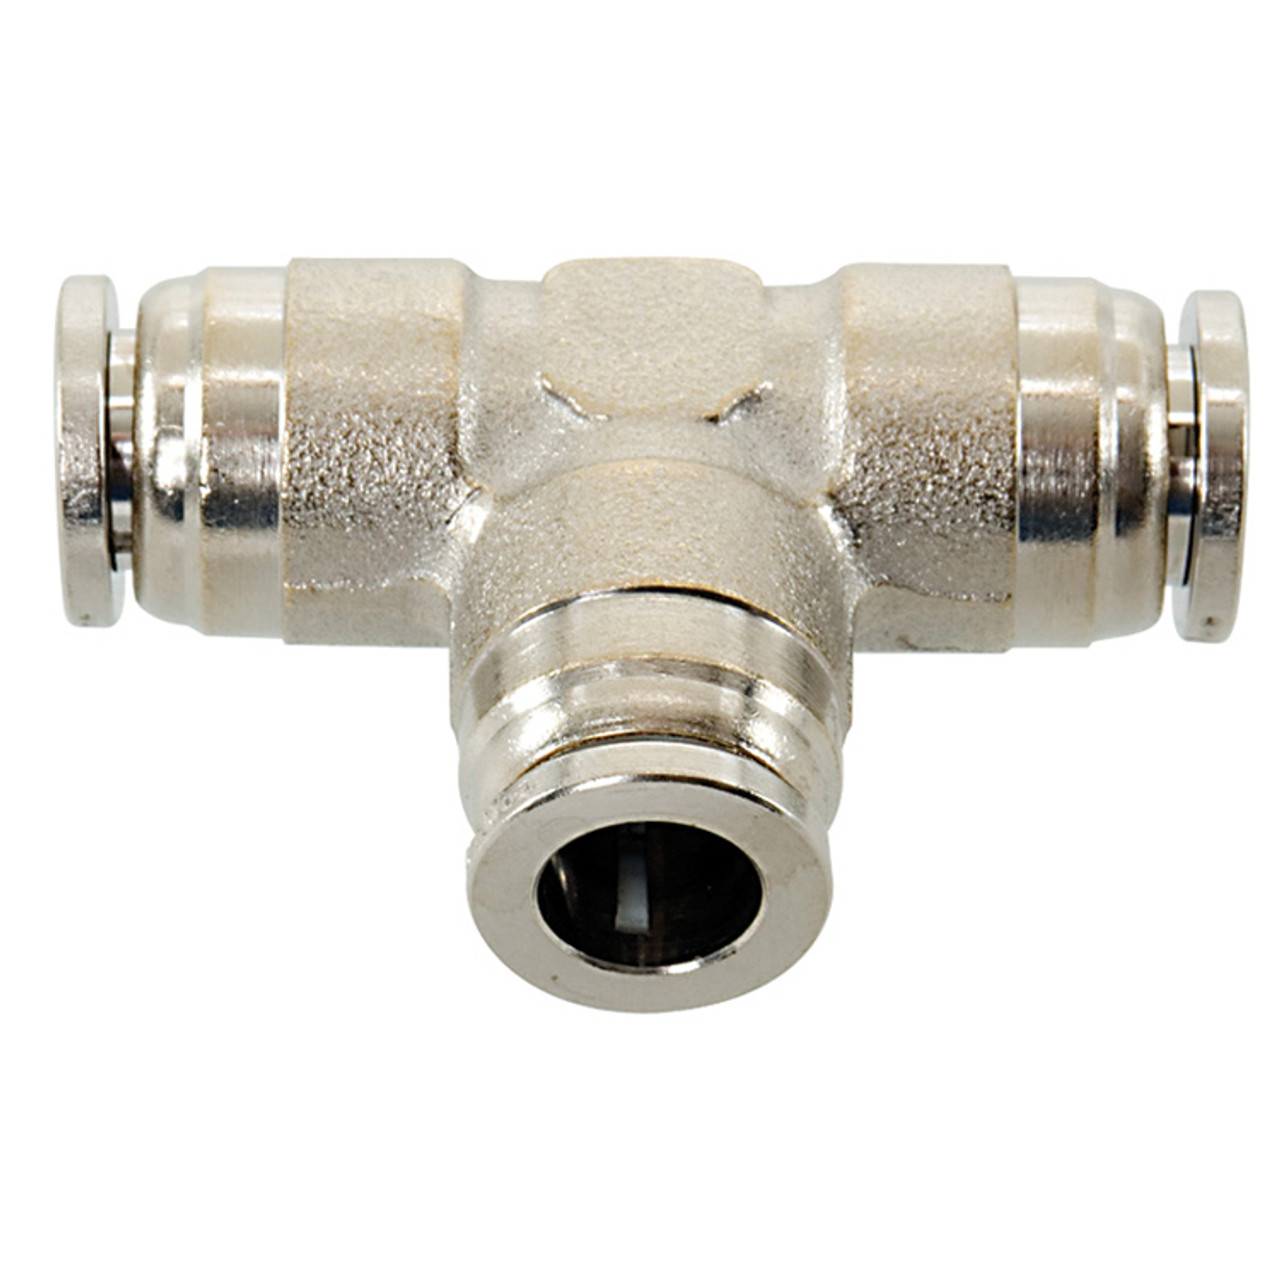 5/32" Nickel Plated Brass Push-To-Connect Tee   G60T00P-02.5-02.5